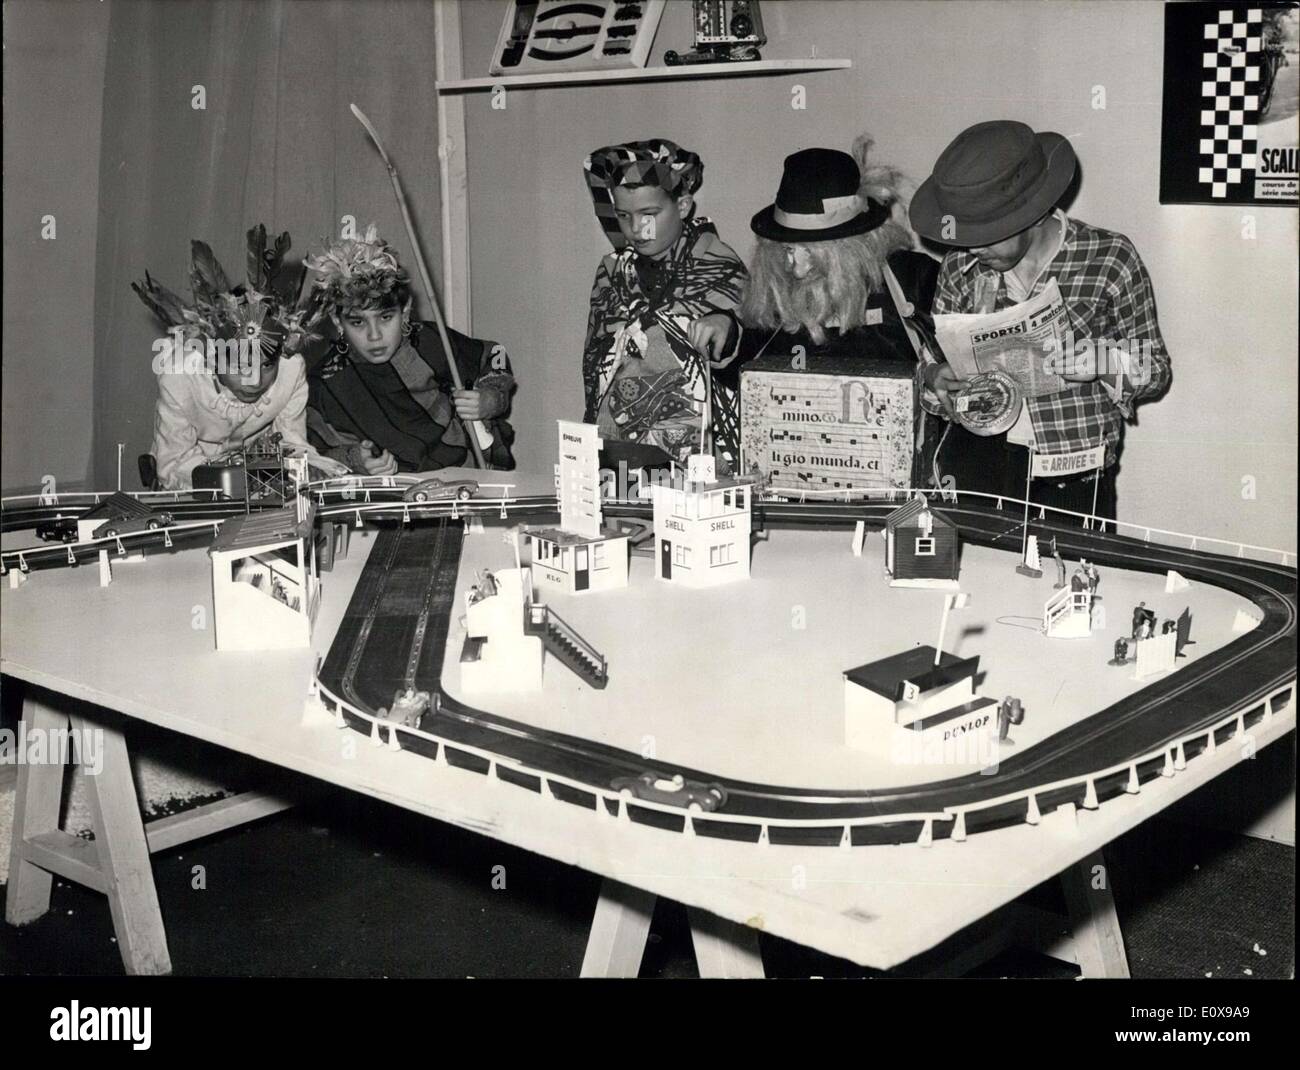 Dec. 09, 1965 - Toys and games exhibition opens at decorative arts museum: An exhibition of toys and games organised under the sponsorship of the youth and sports ministry opened at the Museum of decorative arts in Paris today. Photo shows the first visitors in fancy dresses admiring a miniature racing car track. Stock Photo